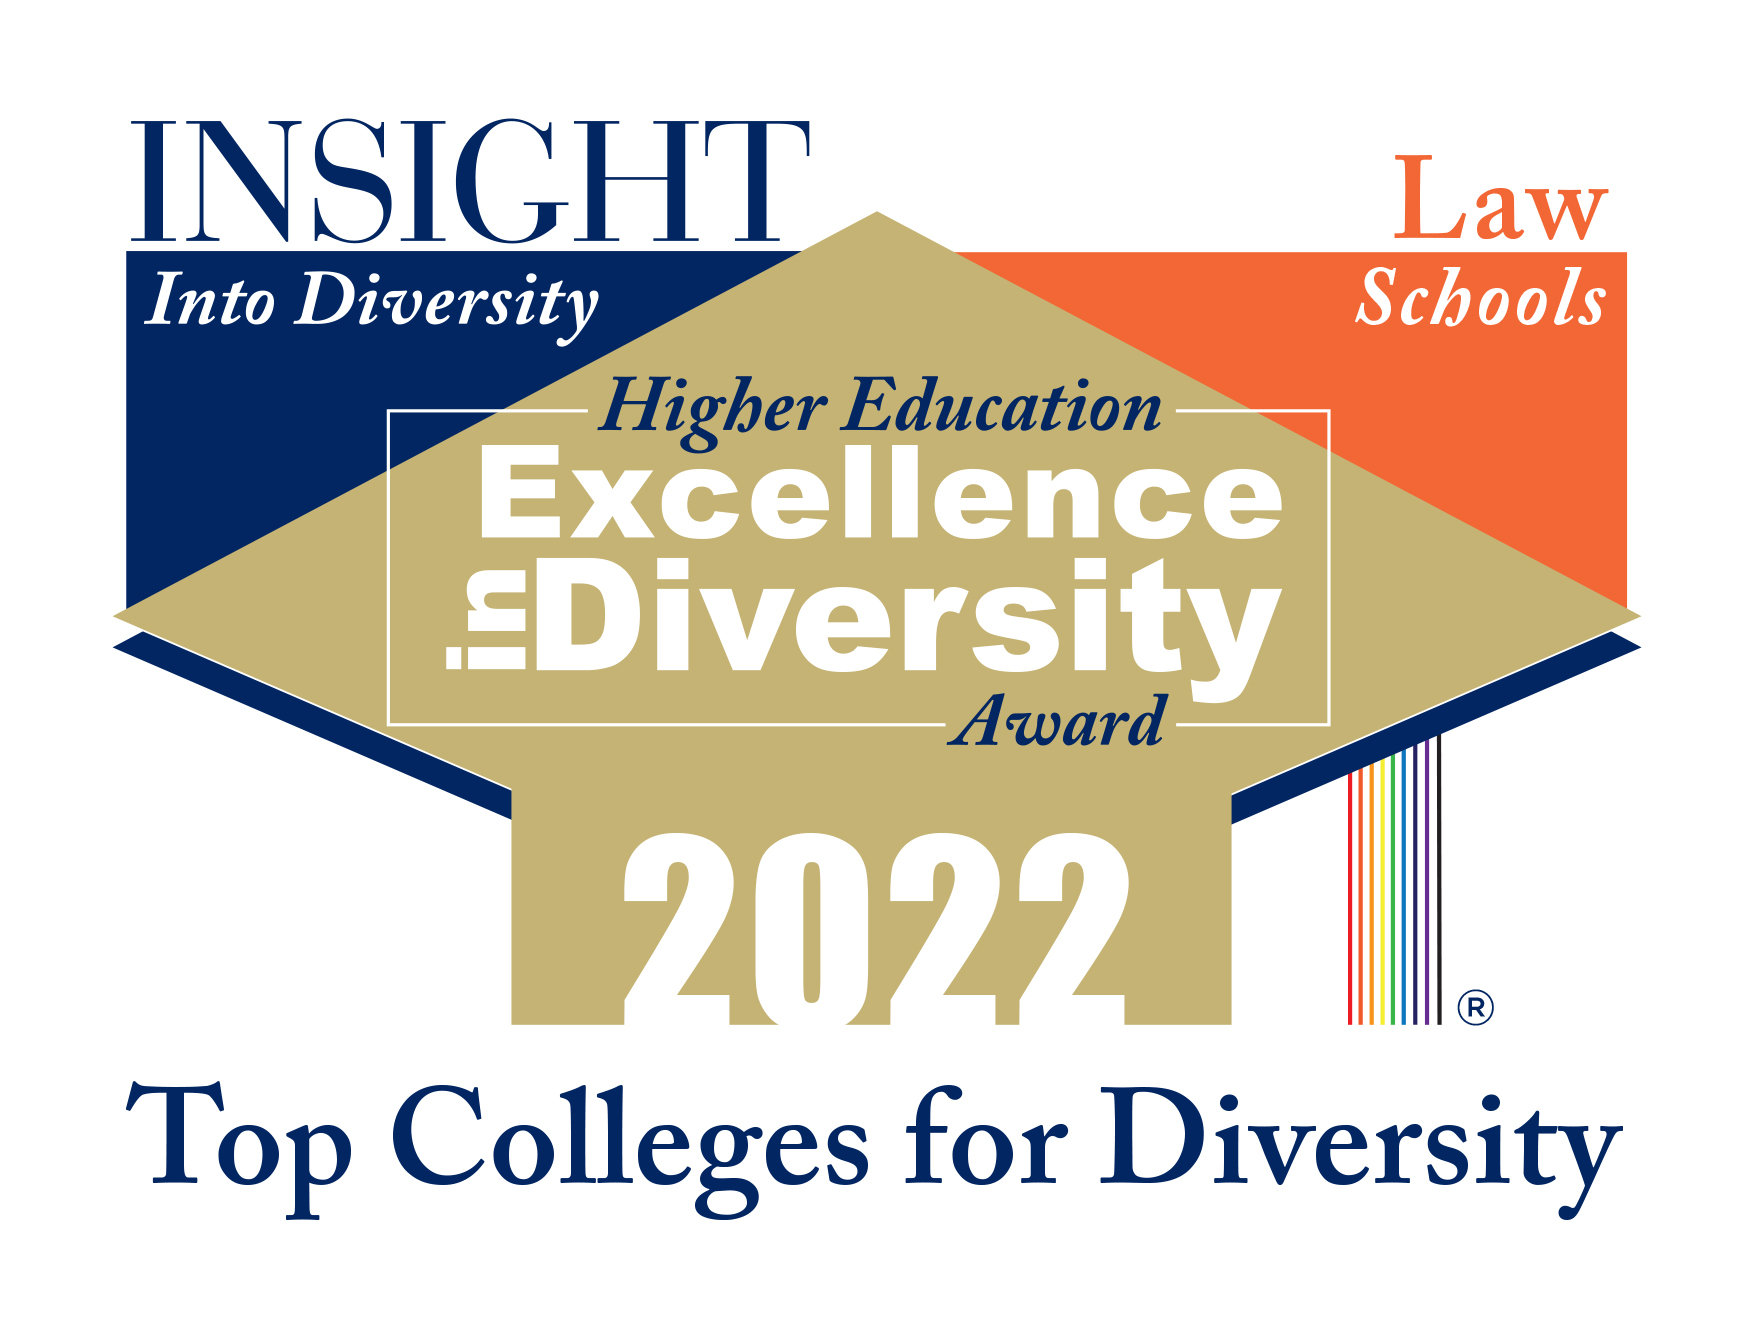 Higher Education Excellence in Diversity Award